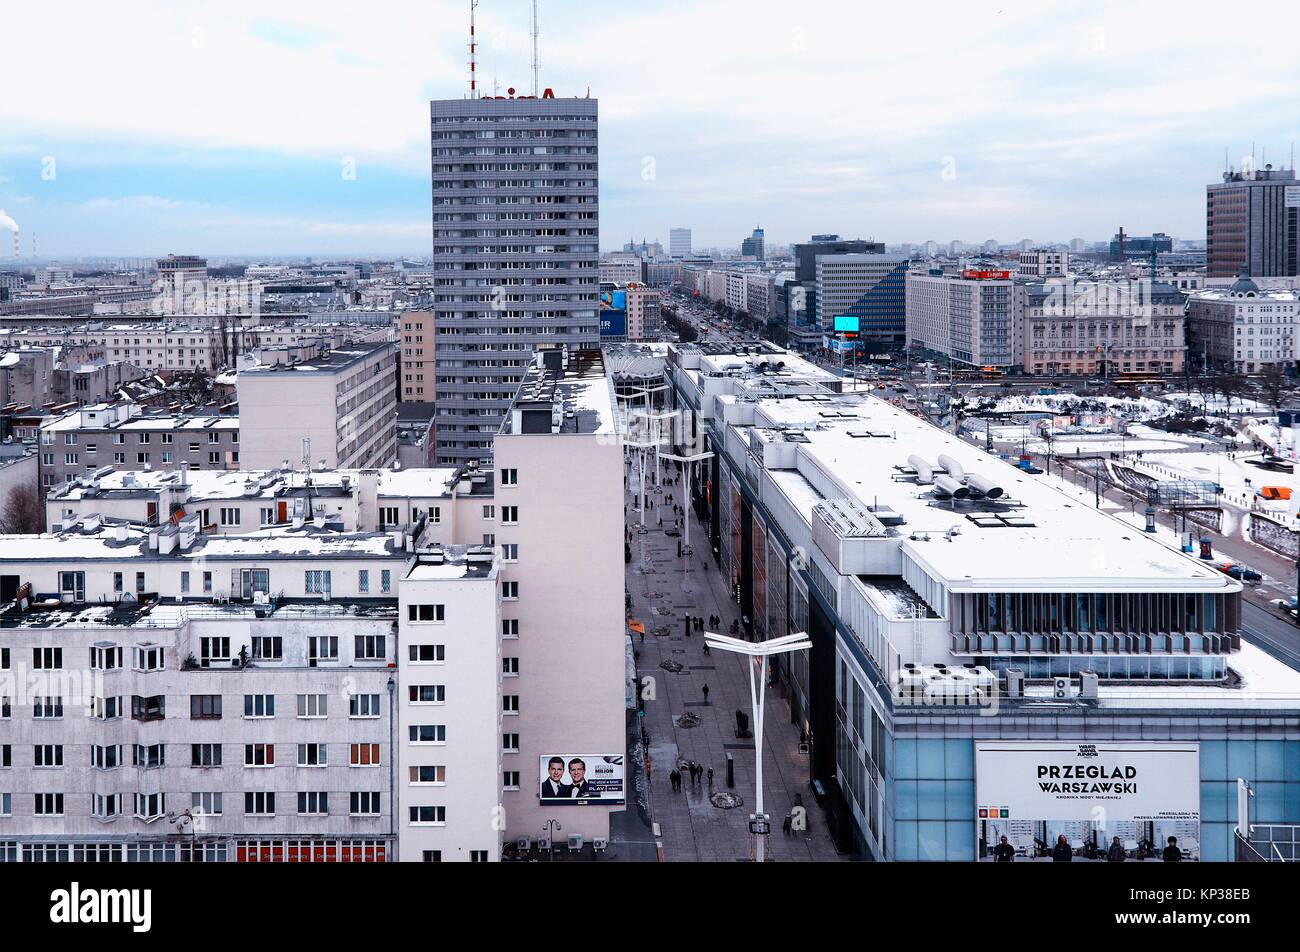 Aerial view of city center of Warsaw, passage - pasaz - Stefana Wiecheckiego Wiecha in the middle, parallel on right - Marszalkowska street - main Stock Photo